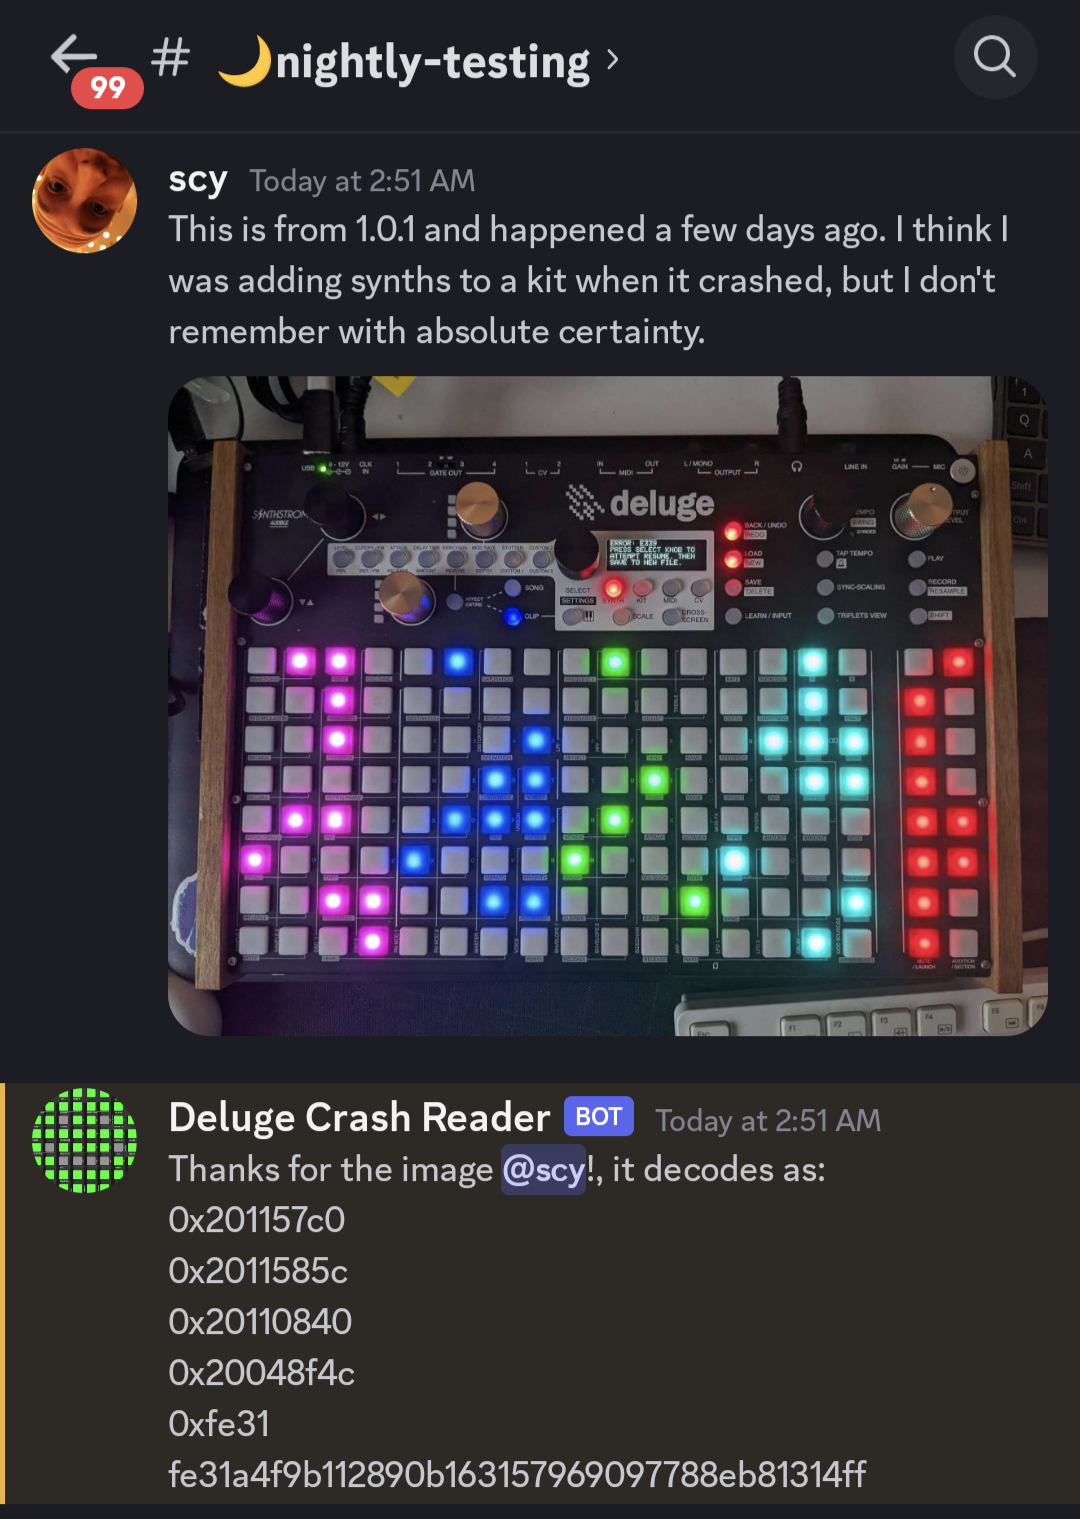 Me, in a Discord channel called "nightly-testing", writing "This is from 1.0.1 and happened a few days ago. I think I was adding synths to a kit when it crashed, but I don't remember with absolute certainty."

Below that, a picture of my Deluge. It's a black metal device with several silicone buttons with colorful LEDs below them. It also has seven knobs (some black, some gold) and an OLED screen. The lower two thirds of the device are taken up by a matrix of 8 rows and 16 columns of square pads with RGB LEDs below them. Then there's an additional 2 columns of 8 rows of the same pads to the right of that, used for muting, auditioning, and playing.

From left to right, the main matrix displays four binary patterns, each 4 columns and 8 rows in size, in different colors: purple, blue, green, and cyan. The two columns on the right also display a pattern, in red.

In each of the patterns, each LED is either illuminated in the color of that block, or not at all. Each block of 4×8 LEDs thus represents a 32 bit address. The two columns on the right represent the first four hex digits of the firmware's Git commit hash.

The small OLED screen says, in capital letters, white on black "Error: E339. Press select knob to attempt resume, then save to new file."

Below my post, there's a reply of the bot "Deluge Crash Reader", saying:

Thanks for the image, @scy!, it decodes as:
0x201157c0
0x2011585c
0x20110840
0x20048f4c
0xfe31
fe31a4f9b112890b16315796907788eb81314ff